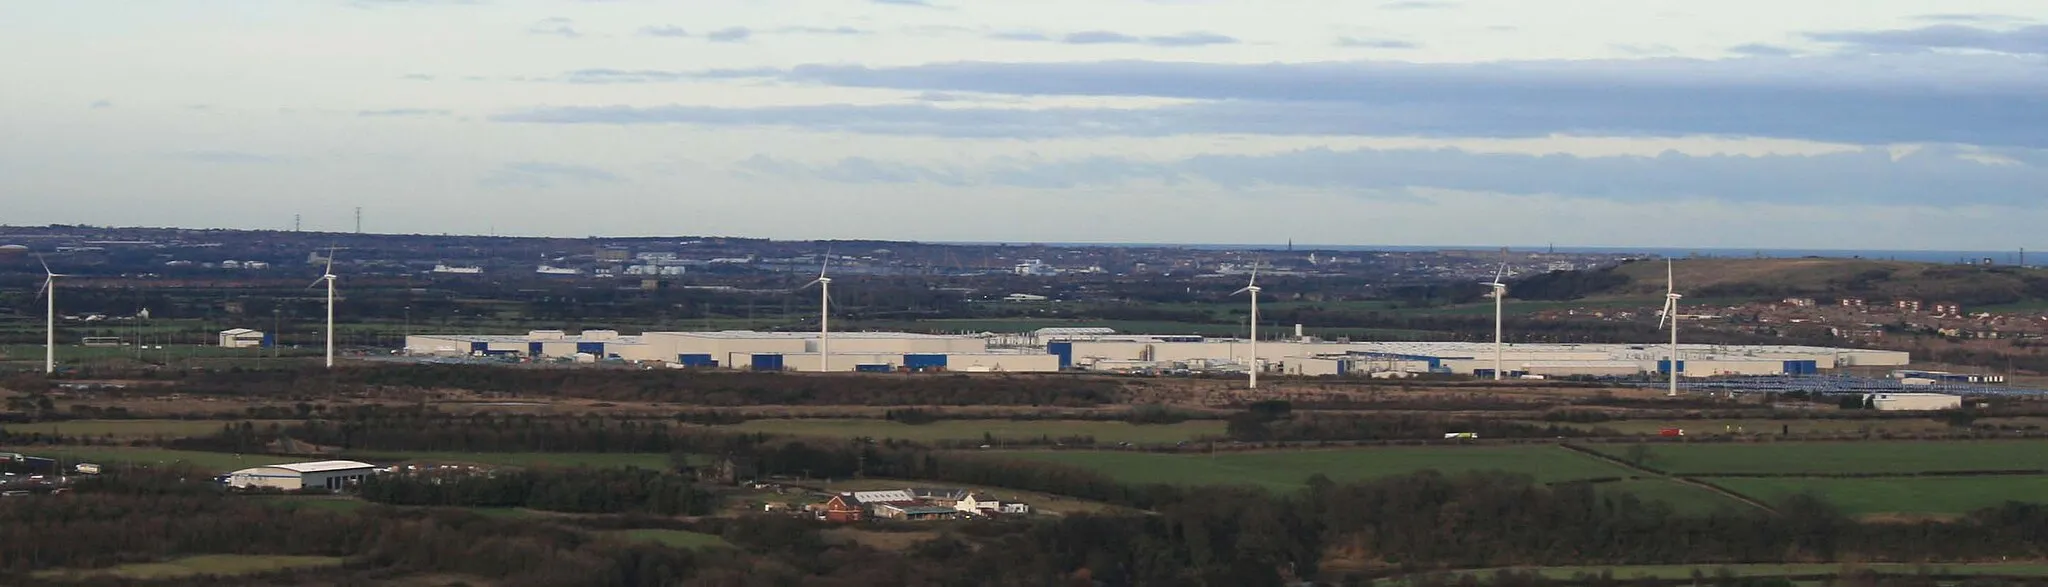 Photo showing: Nissan Motor Manufacturing UK Ltd in Sunderland, UK. Factory complex, including wind turbines, taken from Penshaw Monument.